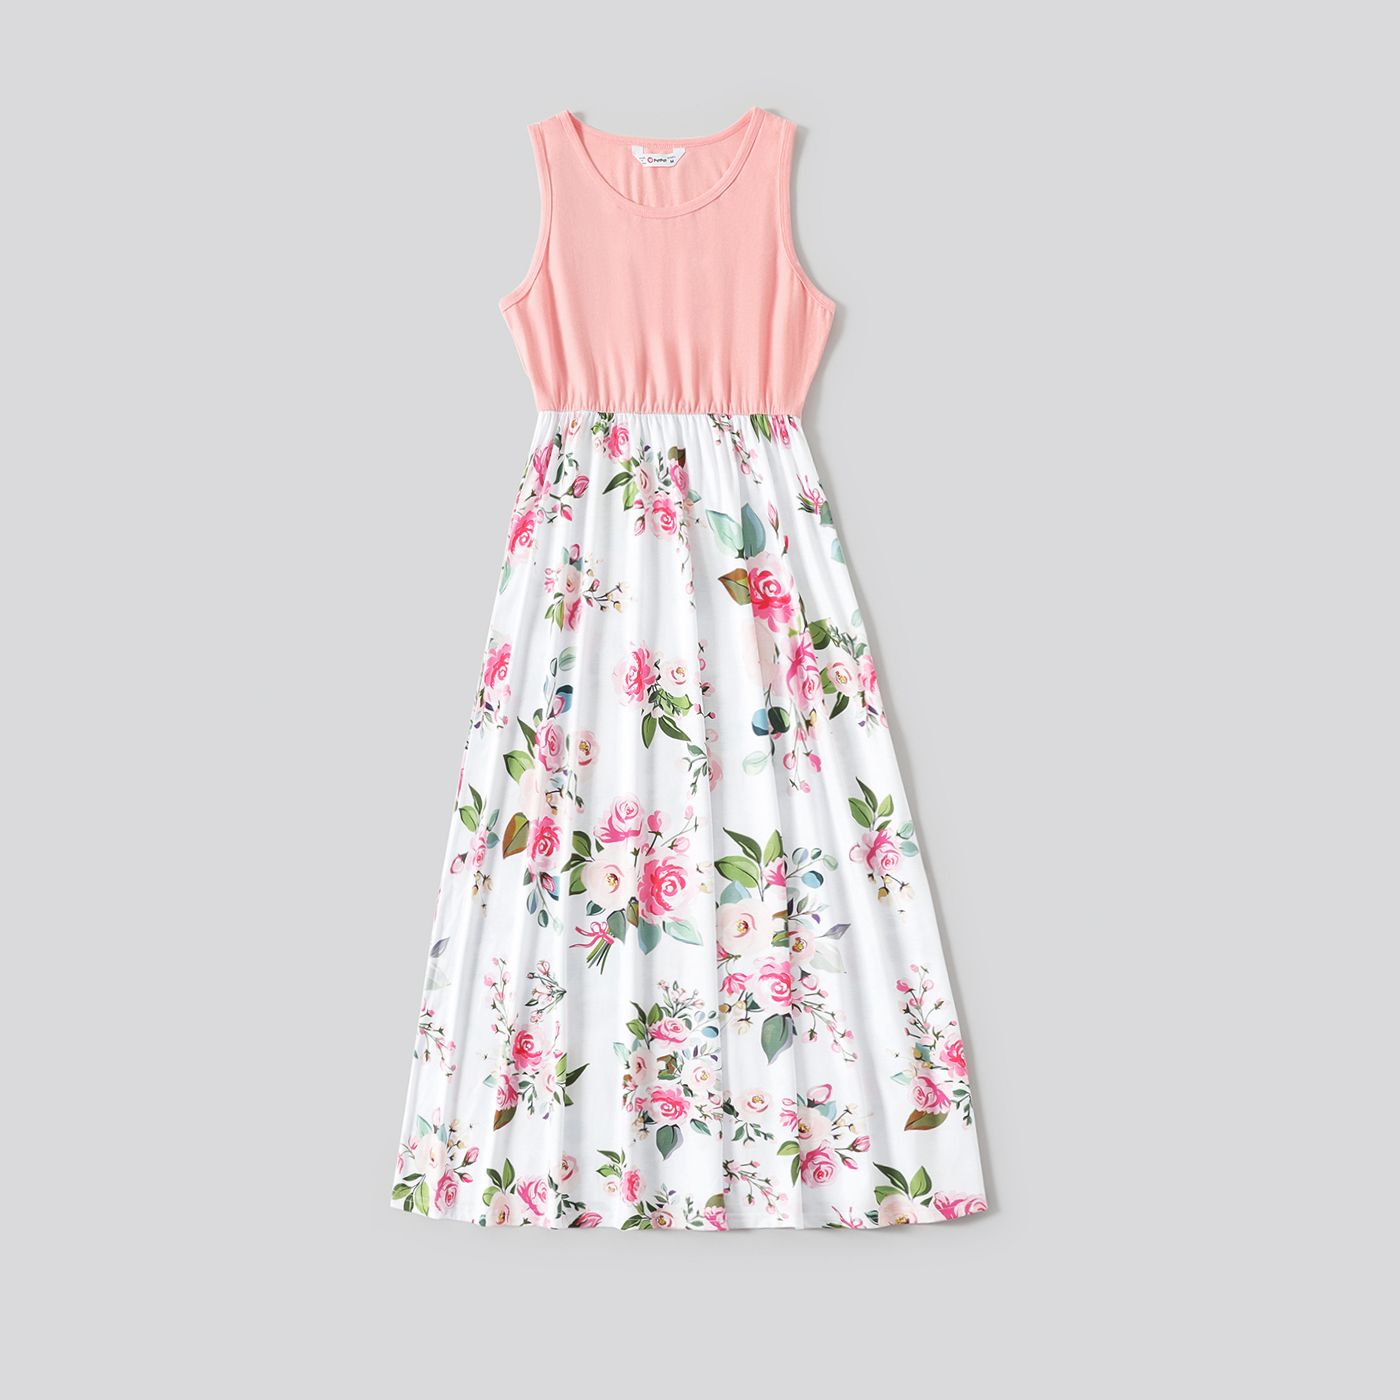 Family Matching Pink Sleeveless Splicing Floral Print Midi Dresses And Colorblock Short-sleeve Polo Shirts Sets